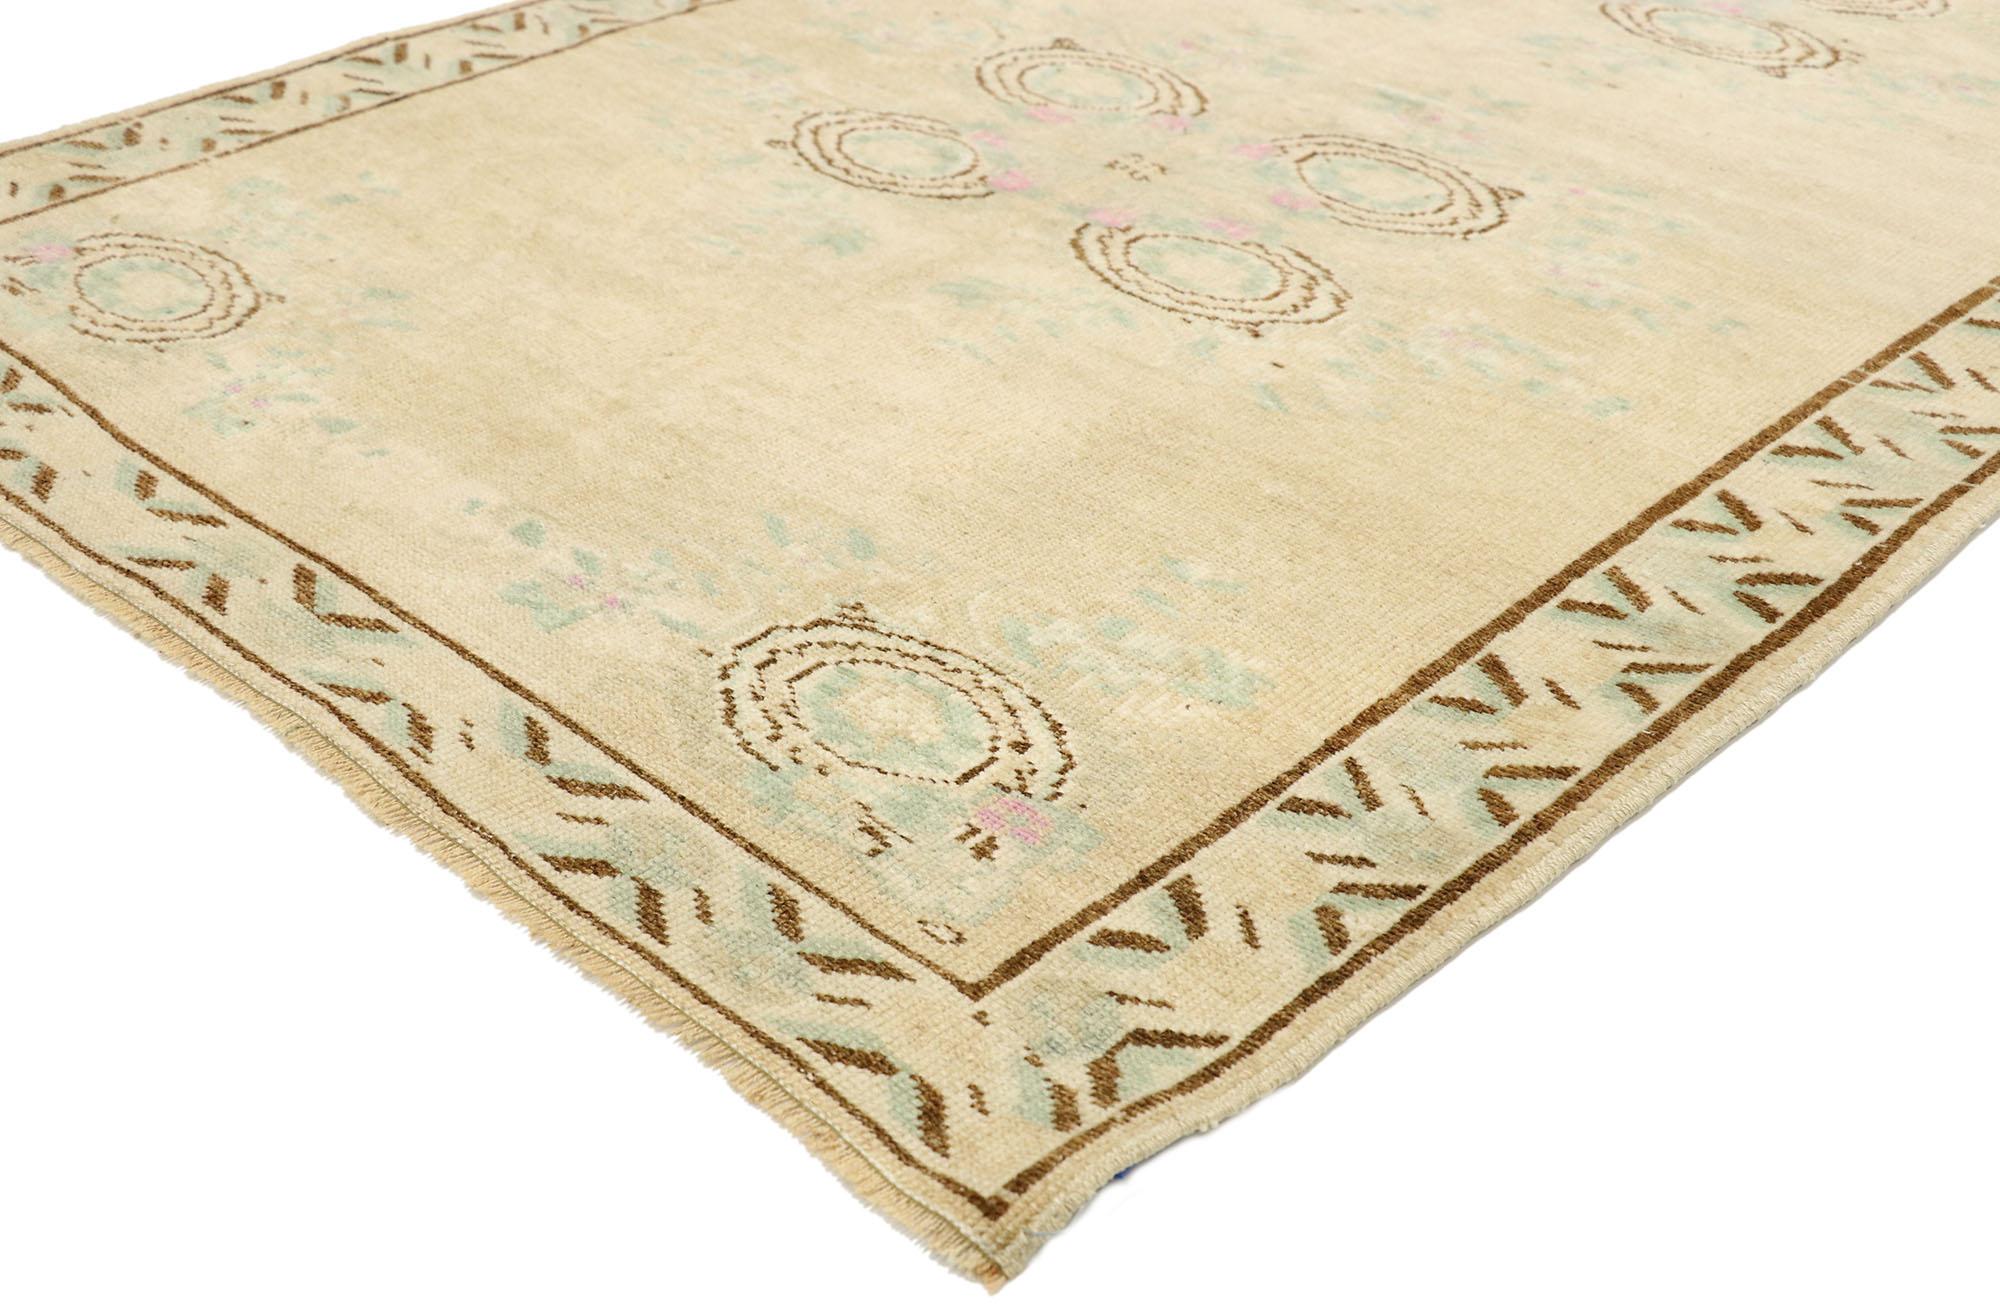 52984 Vintage Turkish Oushak Rug with English Country Cottage Style. Soft, bespoke vibes meet English Country Cottage style in this hand knotted wool vintage Turkish Oushak rug. The champagne antique washed field beautifully displays two leafy